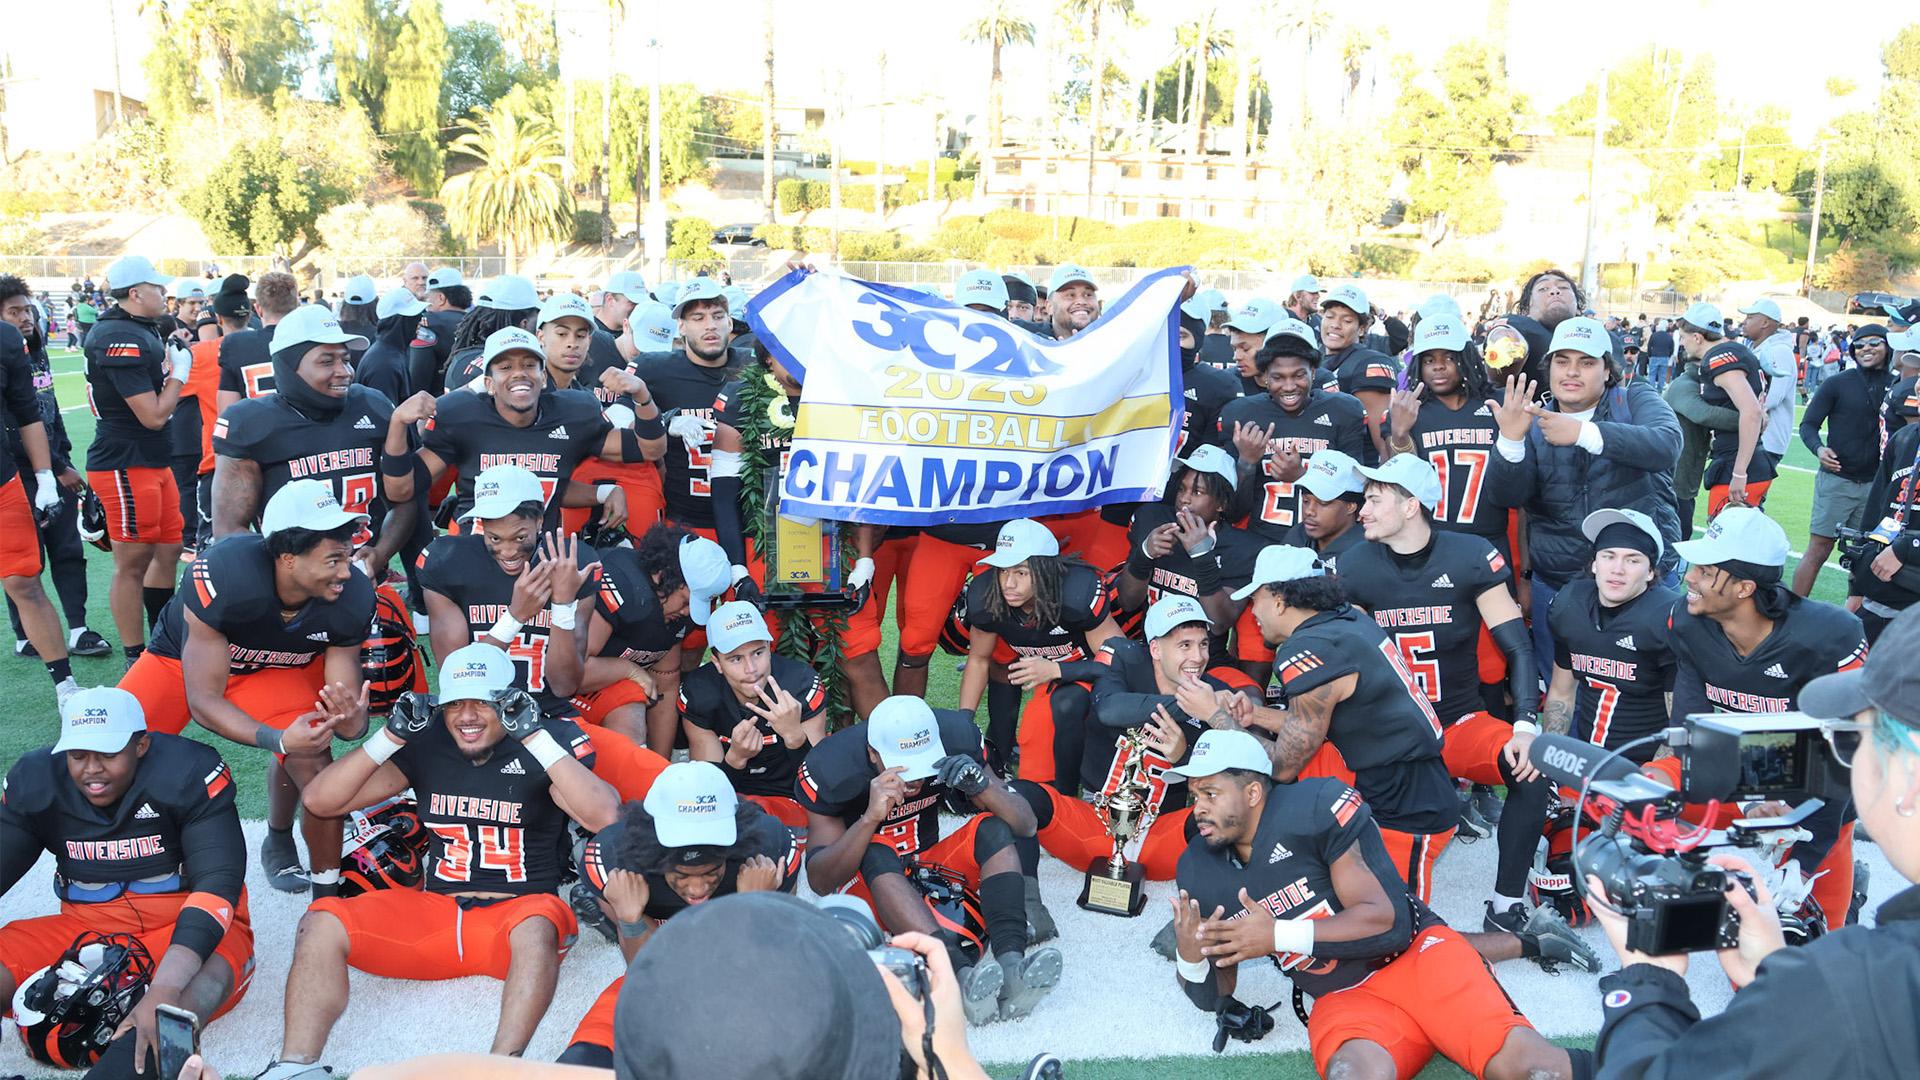 Riverside City College, 3C2A Football Champion (Photo by Richard Quinton)